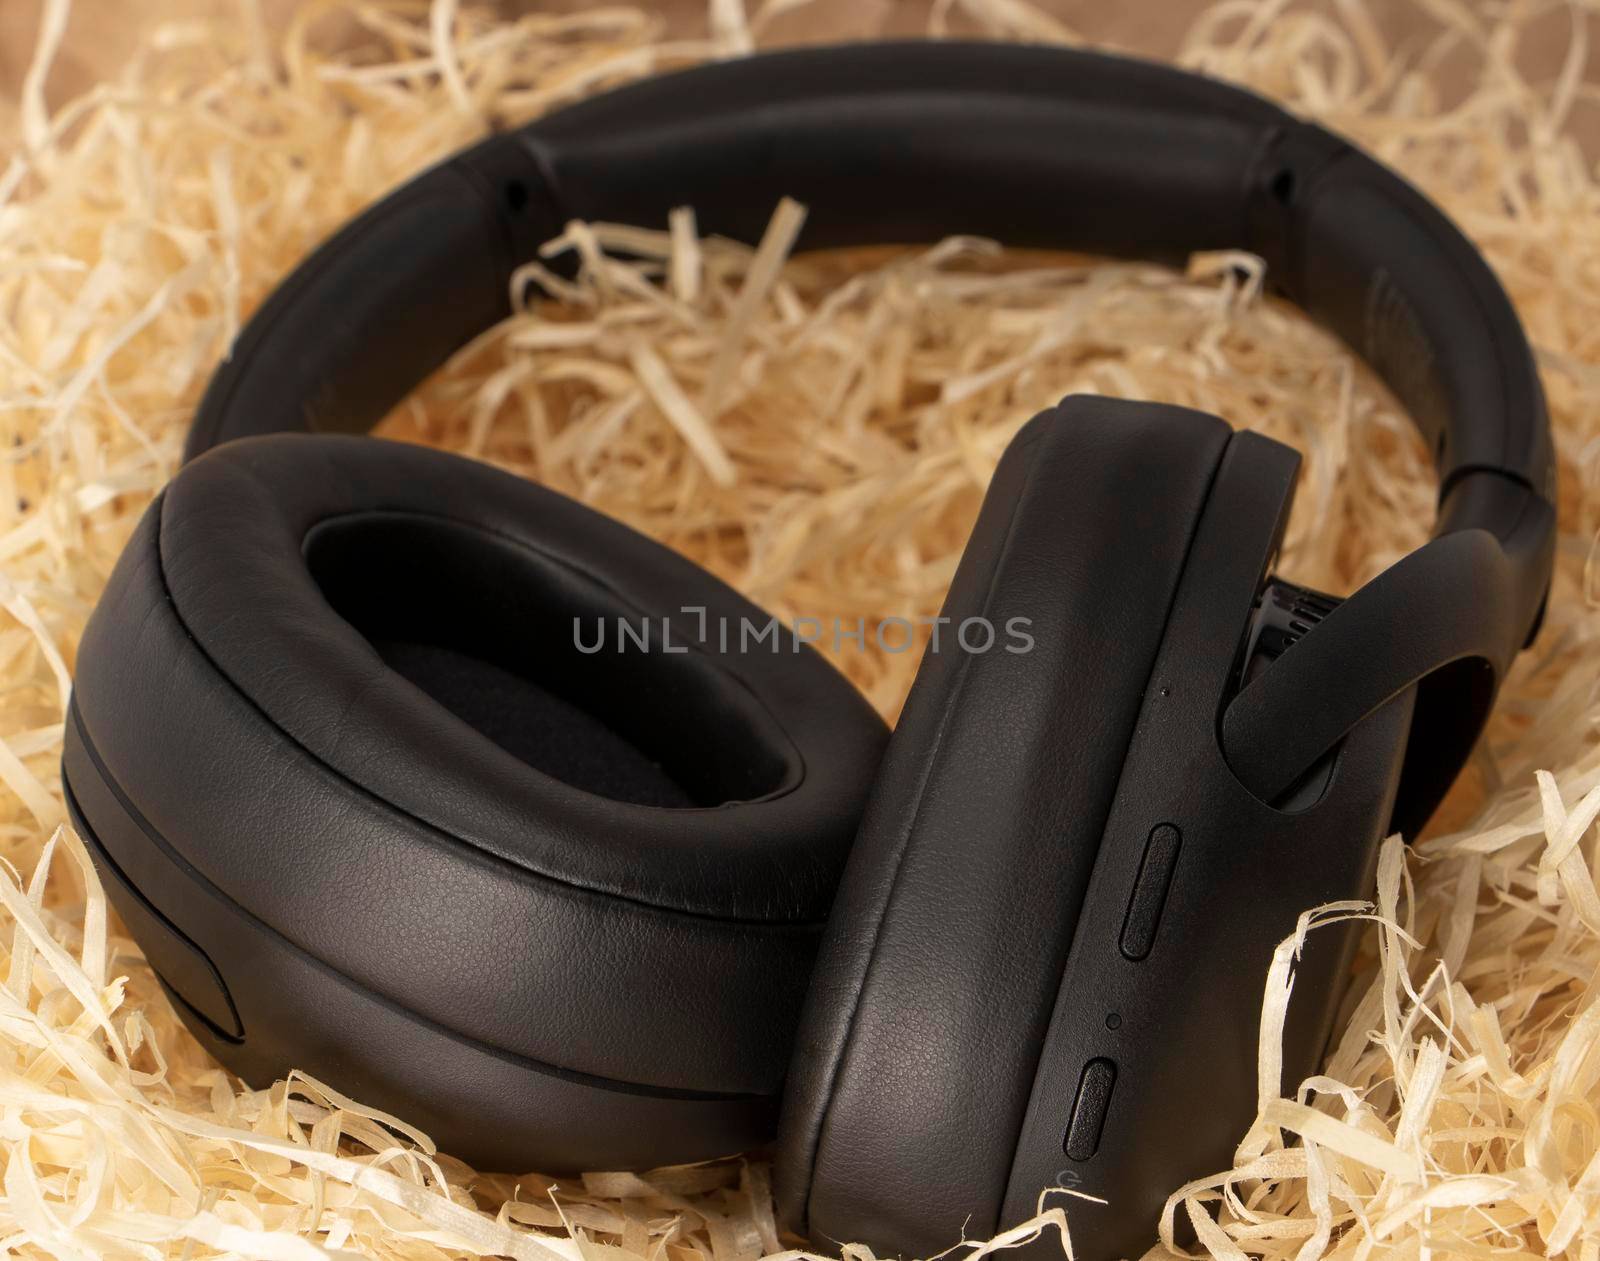 black stereo headphones in gift tinsel, paper shavings. High quality photo